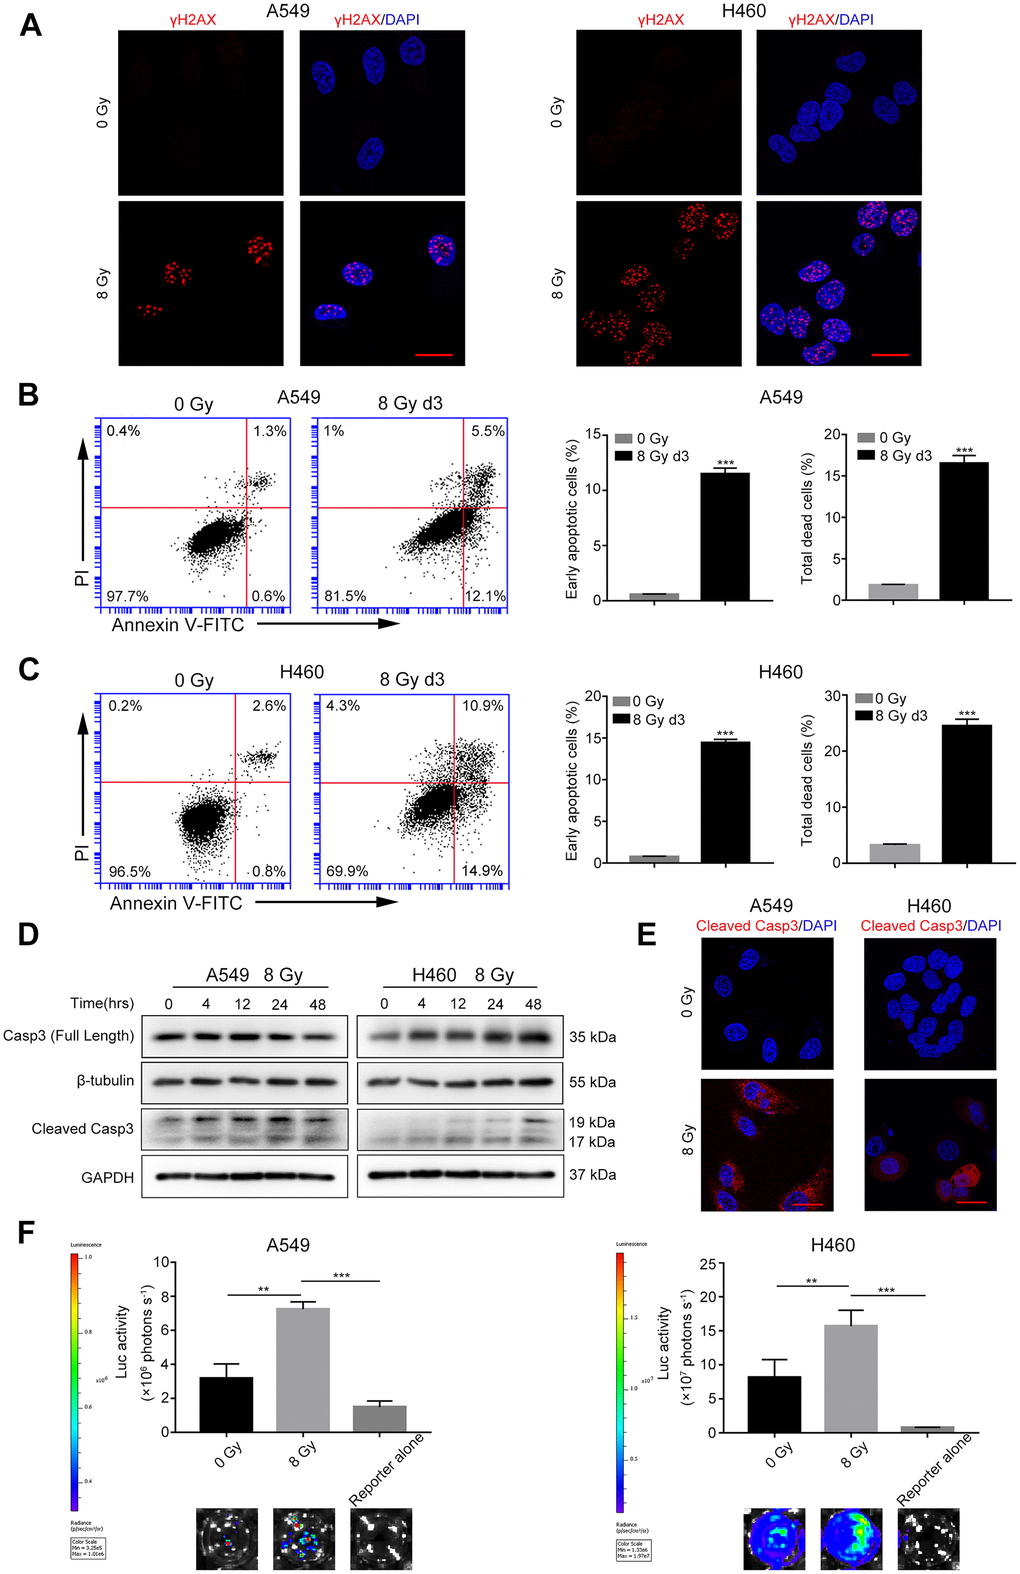 Radiations induce DNA damage, caspase-3 activation, and tumor repopulation in NSCLC cells. (A) Confocal images of immunostained A549 and H460 cells showing γH2AX foci following 8 Gy irradiation at 48 h. Scale bars: 25 μm. (B, C) The left panel shows flow cytometry analysis of A549 (B) and H460 (C) cell death after 0 Gy or 8 Gy irradiation on day 3. Apoptosis was monitored by Annexin V/propidium iodide (PI) double staining. The right panel shows quantitative analysis of early apoptosis and total cell death in 0 Gy- or 8 Gy-irradiated A549 (B) and H460 (C) cells (***pt test, n = 3). (D) Cleaved caspase-3 induced by 8 Gy radiations was assayed by western blotting, and β-tubulin and glyceraldehyde 3-phosphate dehydrogenase (GAPDH) served as loading controls. (E) Representative confocal images of immunostained A549 and H460 cells showing cleaved caspase-3 following exposure to 8 Gy radiations on day 3. Scale bars: 25 μm. (F) The 8 Gy-irradiated NSCLC cells promoted the growth of living NSCLC reporter cells. The upper panel depicts luciferase activities showing the growth of A549 Fluc and H460 Fluc cells that were seeded alone or with 0 Gy- or 8 Gy-irradiated NSCLC cells. The lower panel shows the representative bioluminescence images (**ppn = 4).